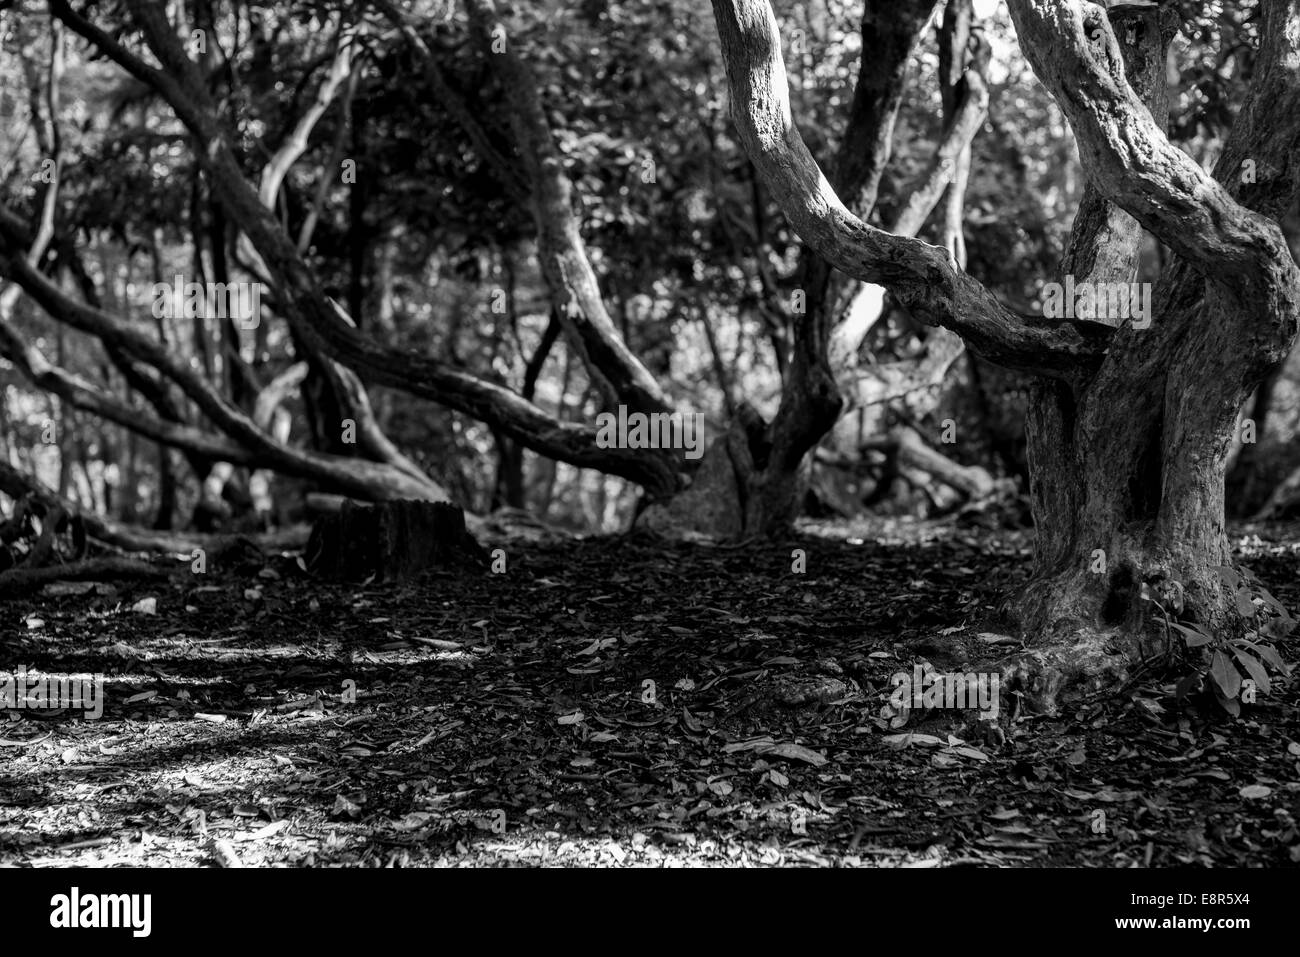 monochrome black and white of twisted gnarly trees Stock Photo